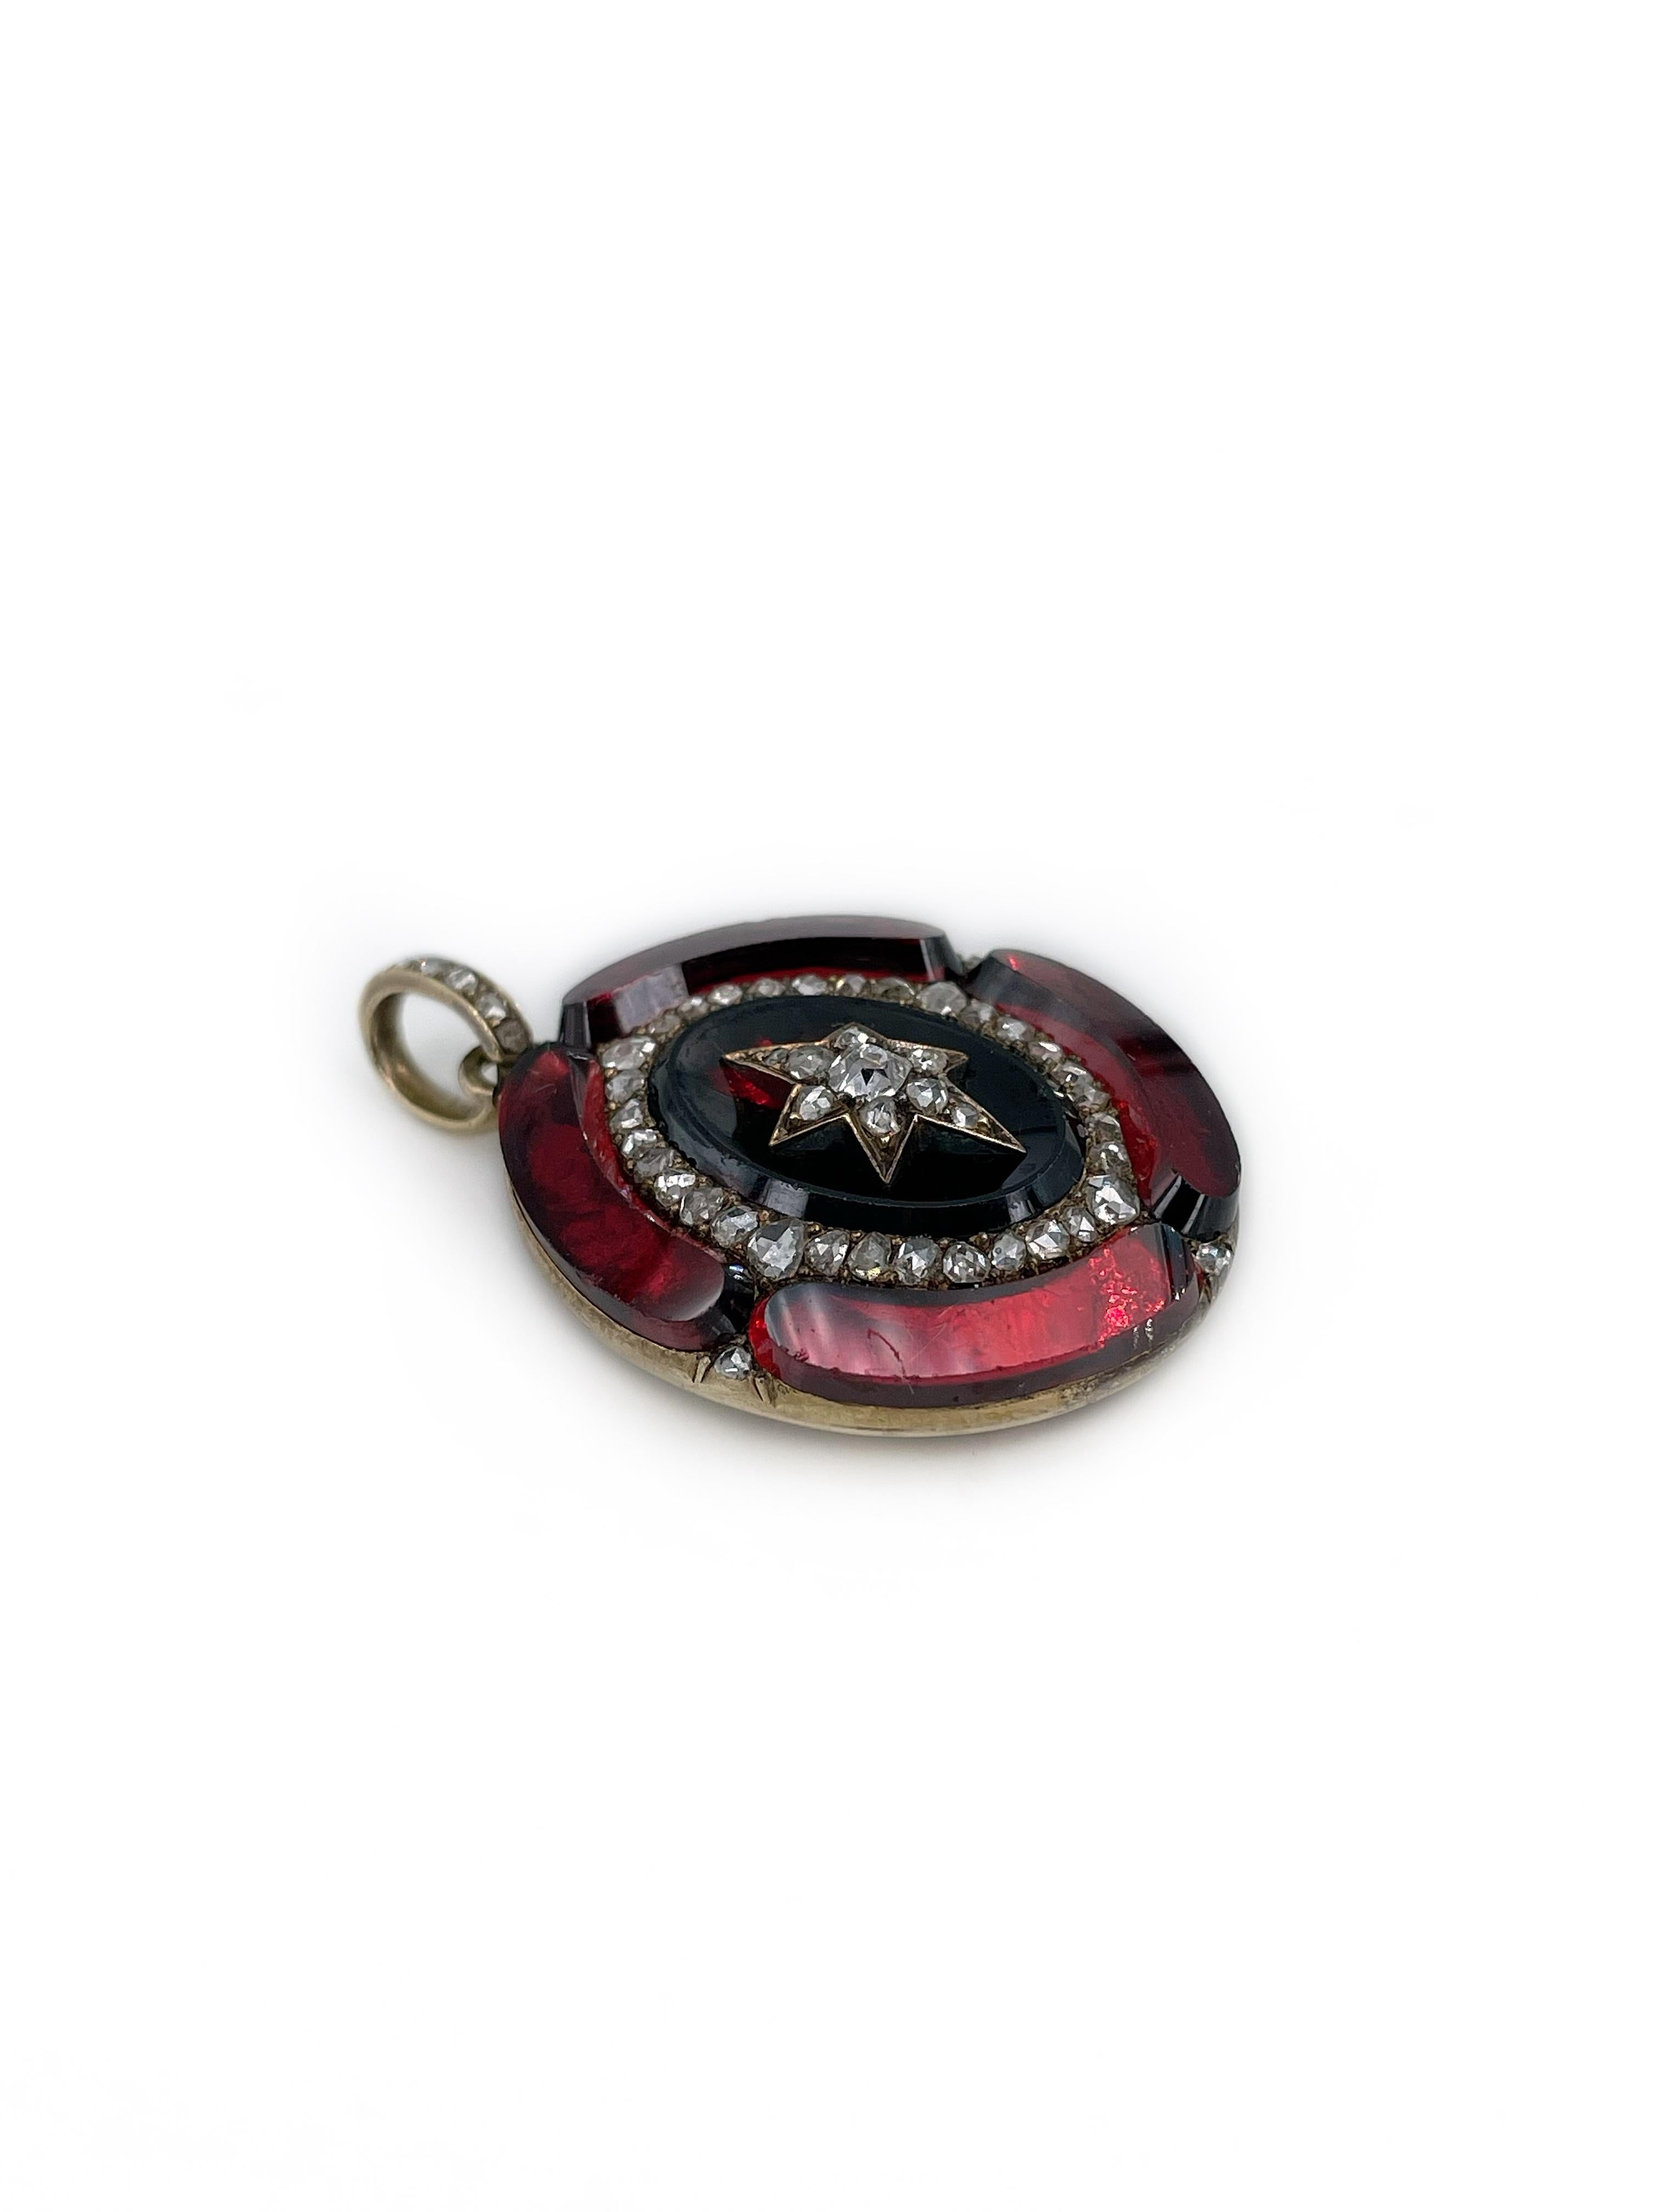 This is a gorgeous Victorian oval pendant crafted in 18K gold. It features polished garnets and rose cut diamonds. There is a six pointed star in the centre. 

The back side with the glass doesn’t open. 
 
Circa 1860

Weight: 13.24g
Size: